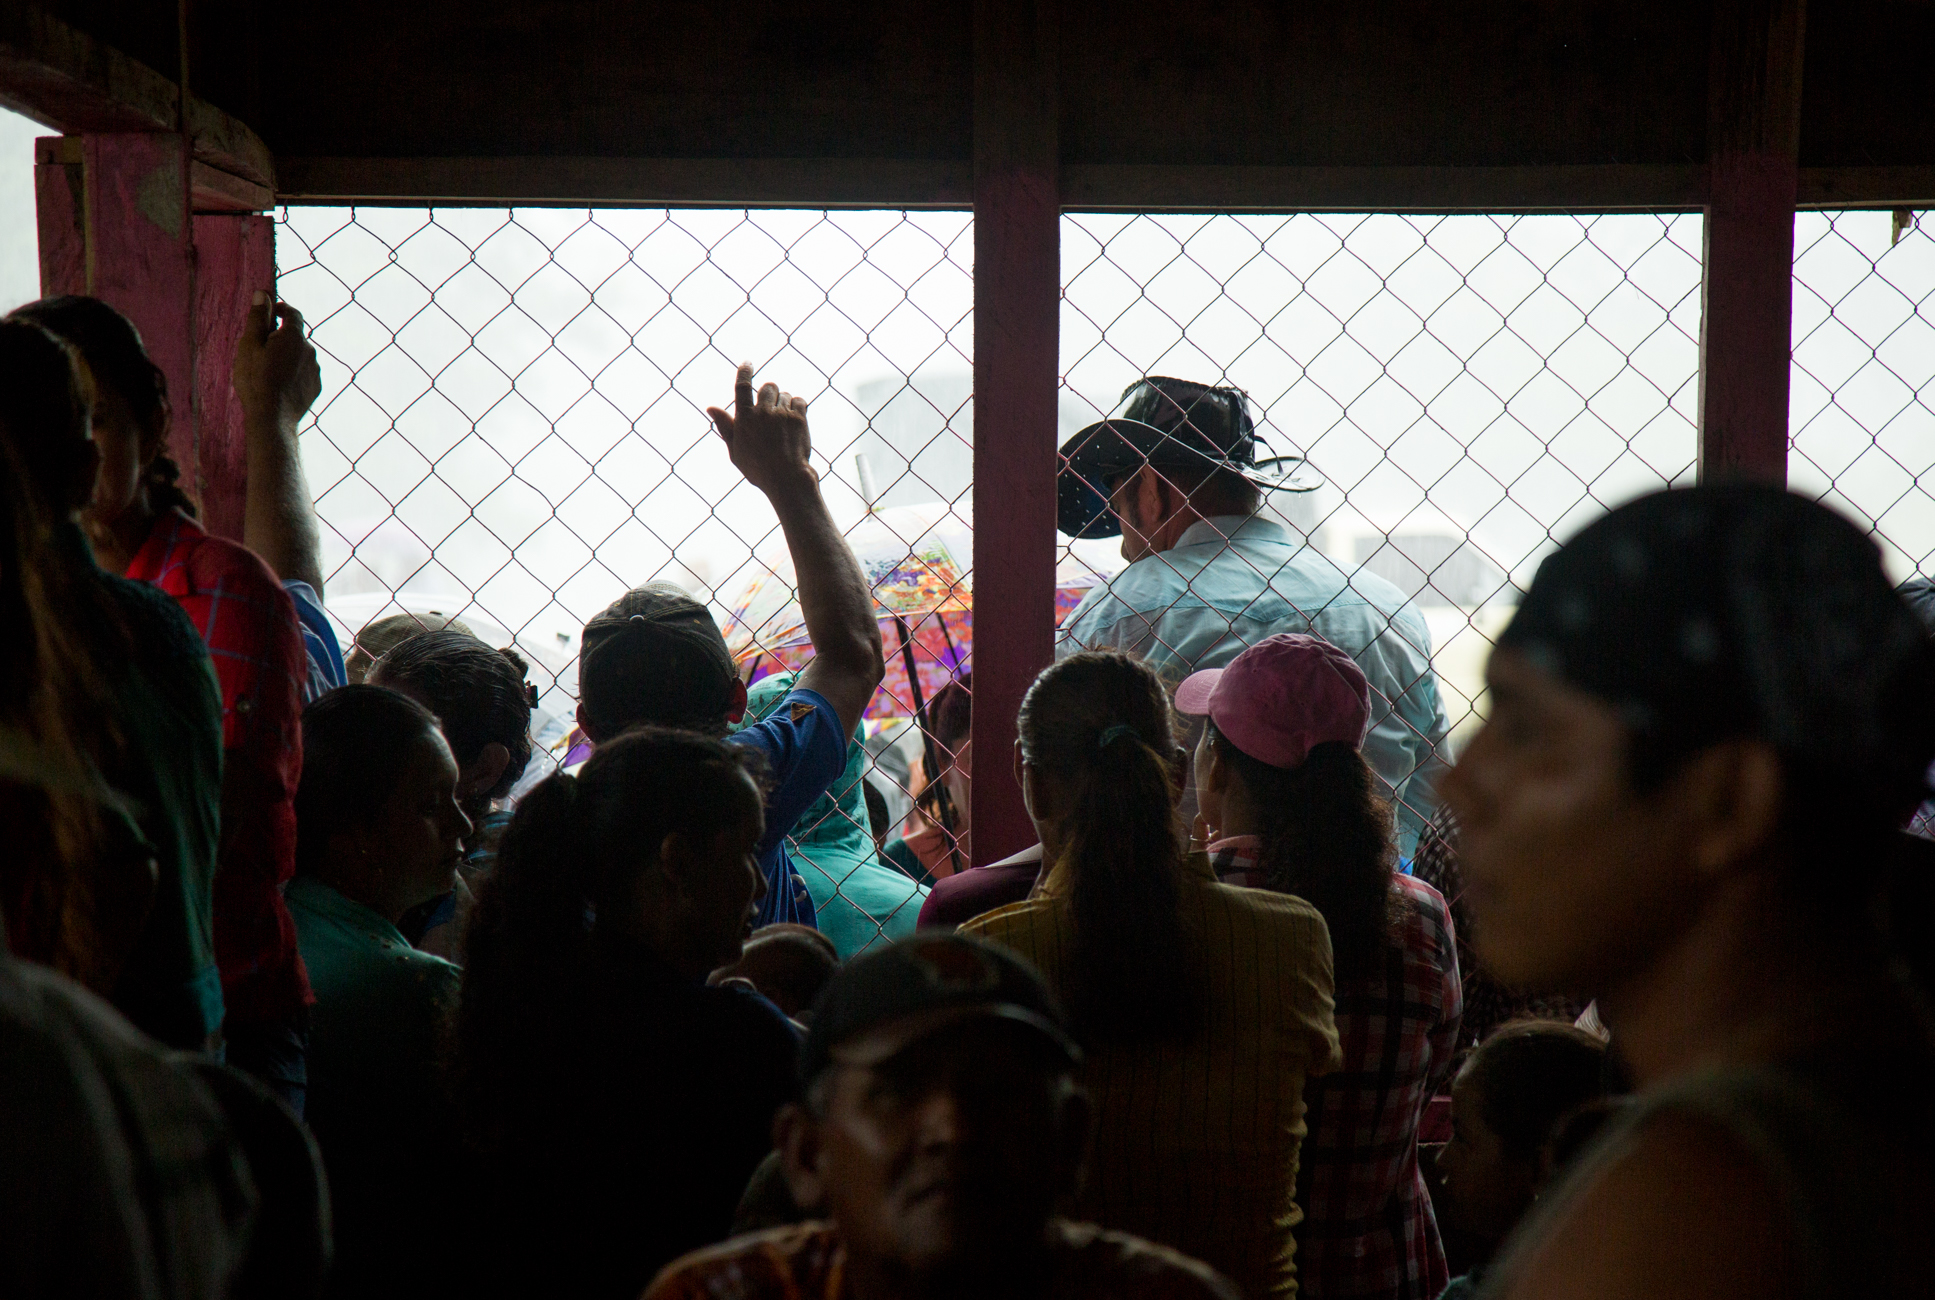  Trying to keep dry, crowds huddle under umbrellas and a small structure which has been spray panted "No Canal, No Law 840" and "Daniel Ortega sells our country" at a protest against the Ley 840 and the Nicaraguan Canal project which could expropriat